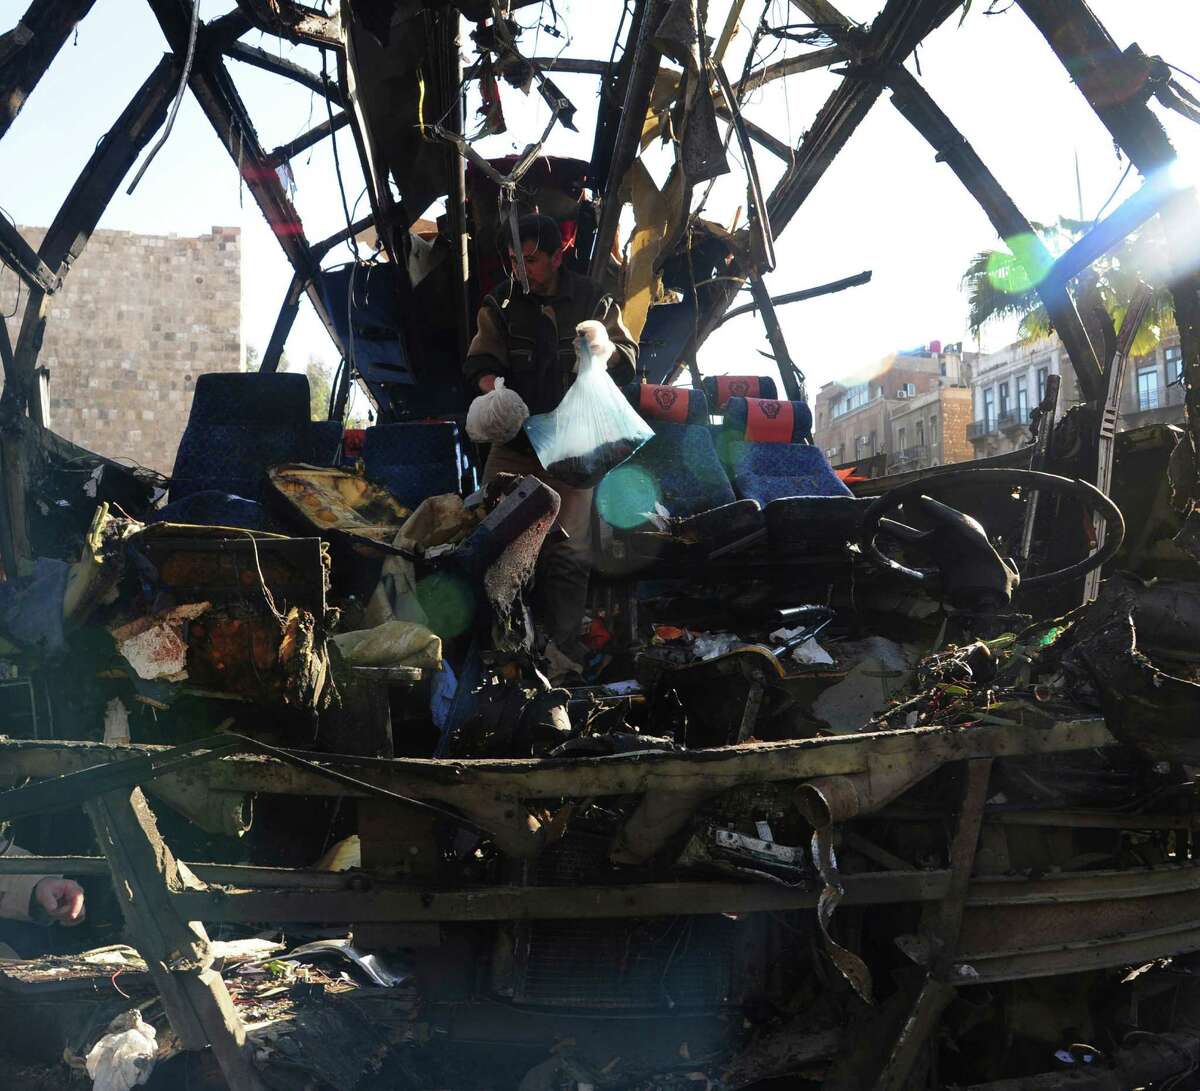 In this photo released by the Syrian official news agency SANA, a man, at centre, collects items from inside a destroyed Lebanese tour bus after a bomb attack, in Damascus, Syria, Sunday, Feb. 1, 2015. A bomb placed on the bus ferrying Lebanese pilgrims around Shiite holy sites in Damascus exploded Sunday, killing at least seven people, according to Syrian activists and Lebanese media, underscoring the sectarian nature of Syria's four-year war.